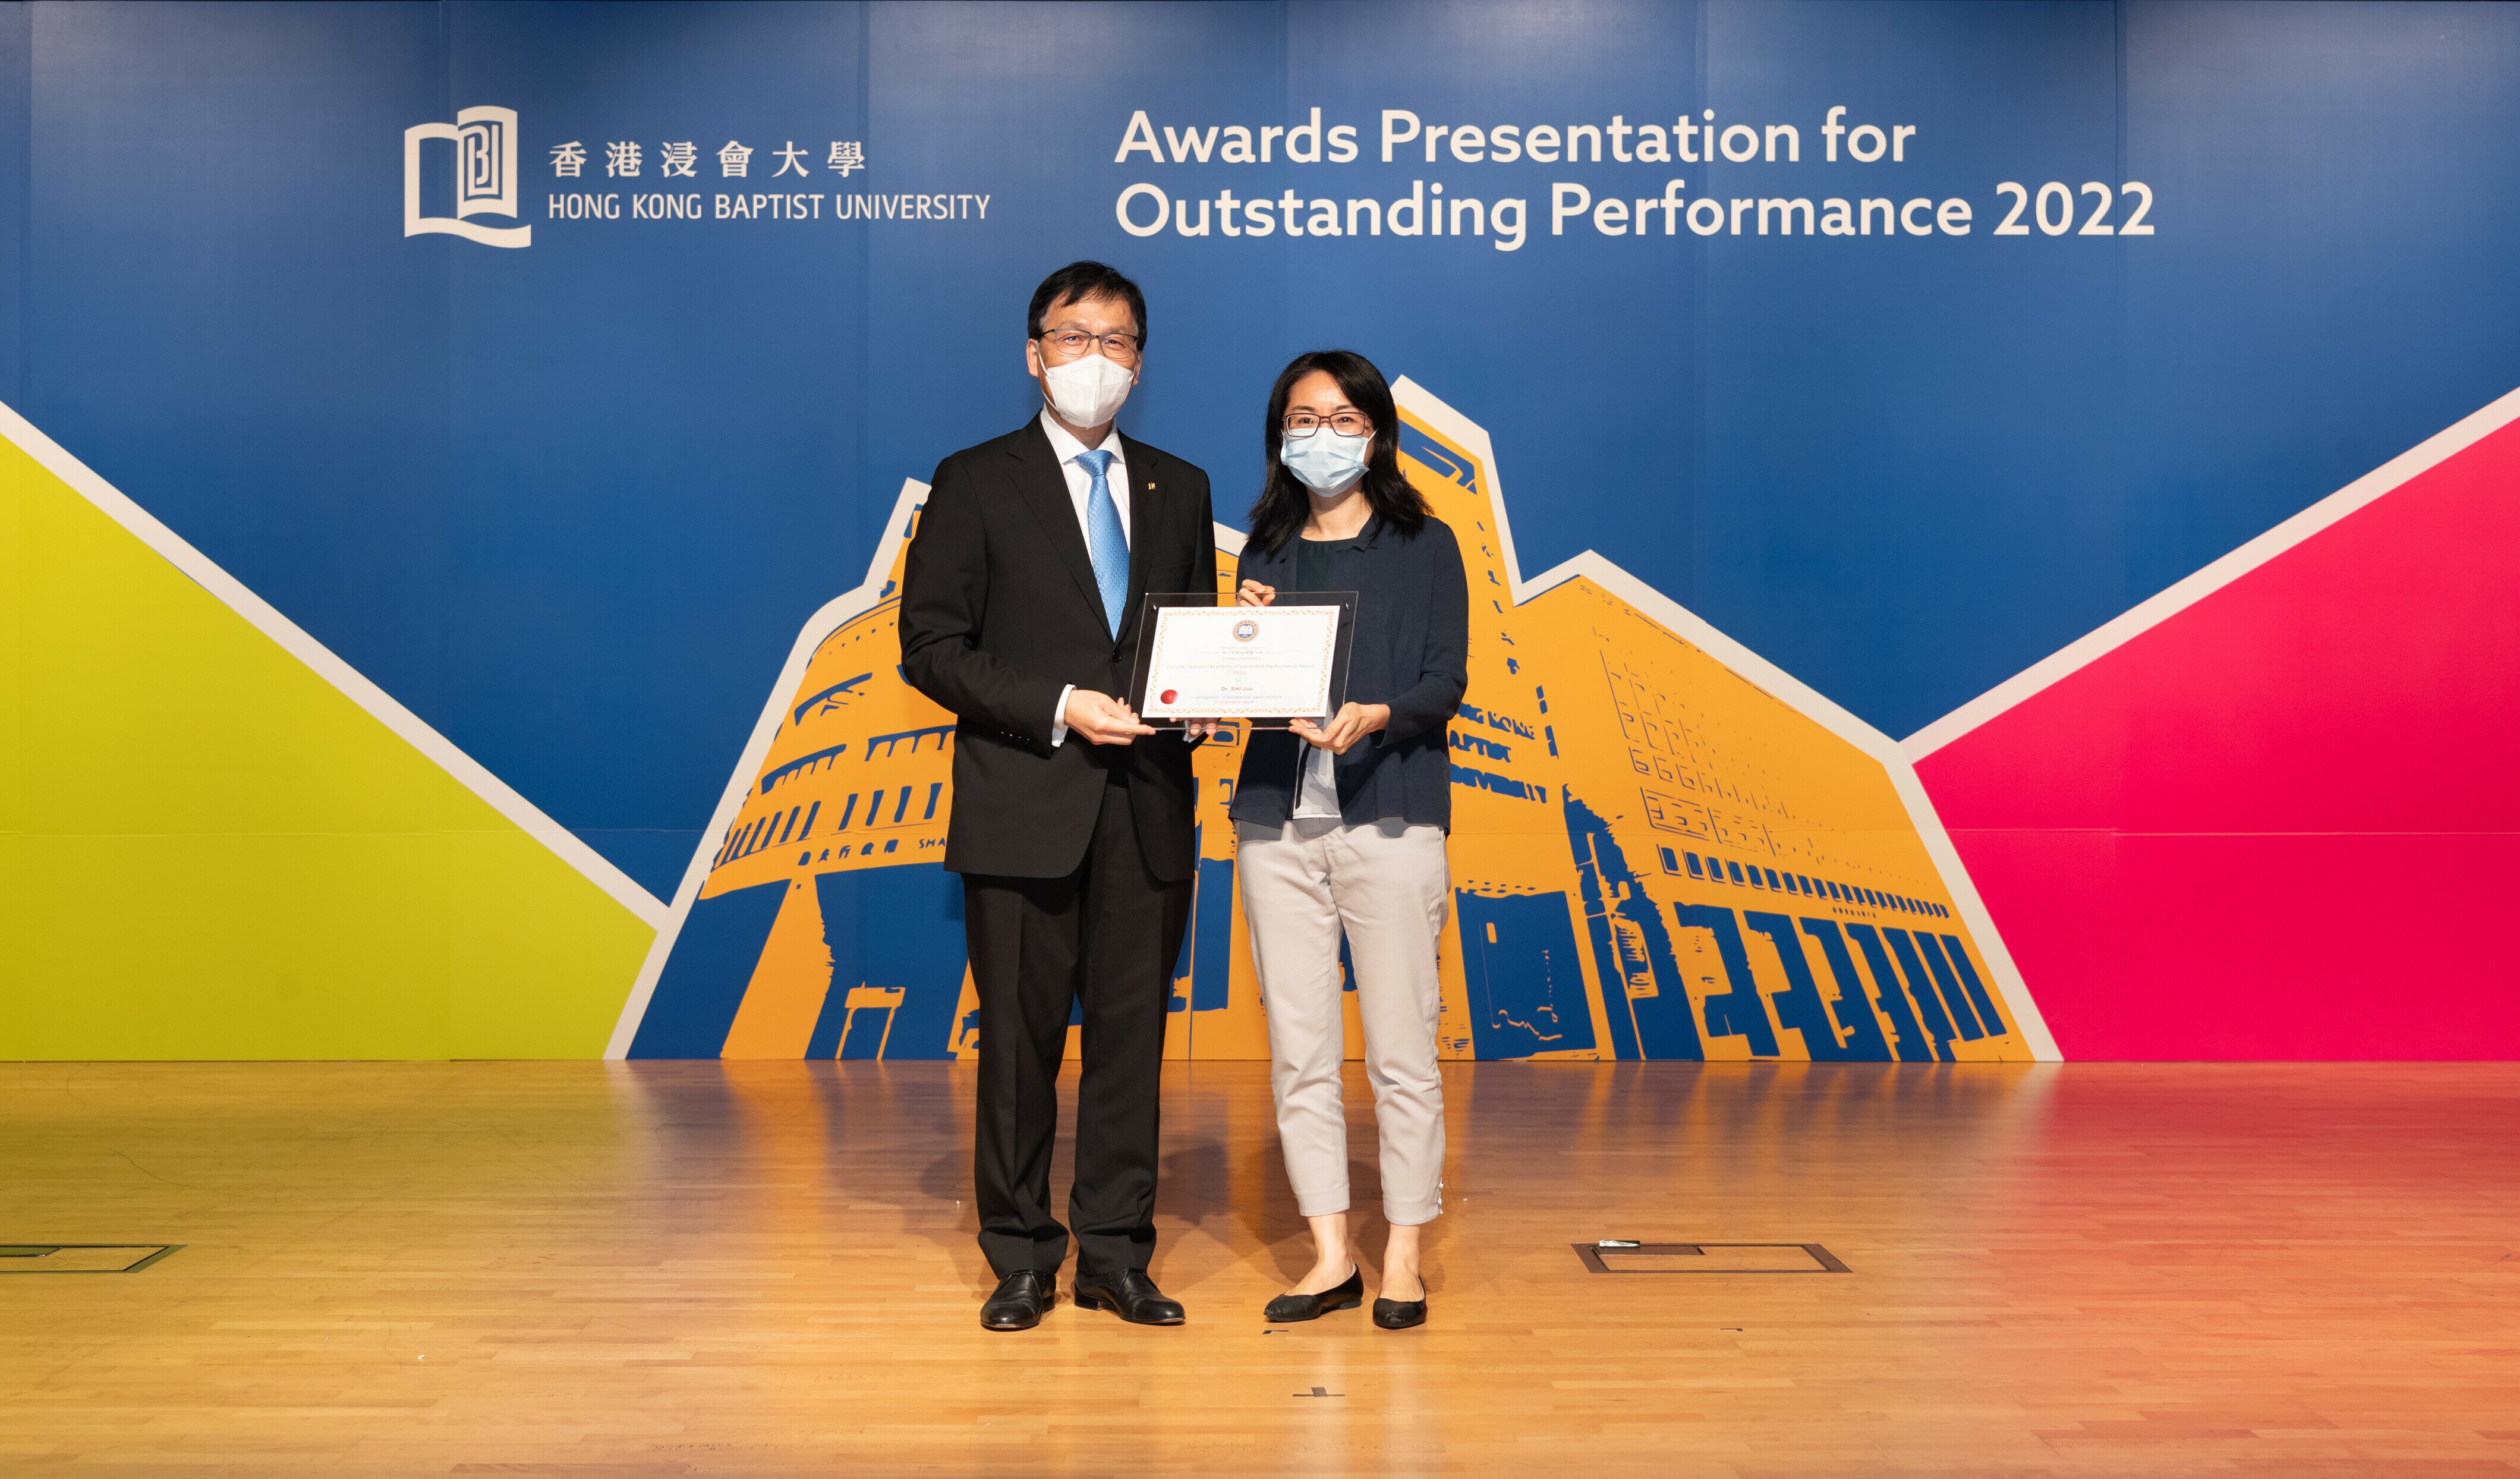 Associate Professor SHI Jue and Associate Professor HUANG Zhifeng were presented with Faculty/School/Academy Performance Award in Scholarly Work and Research Supervisio